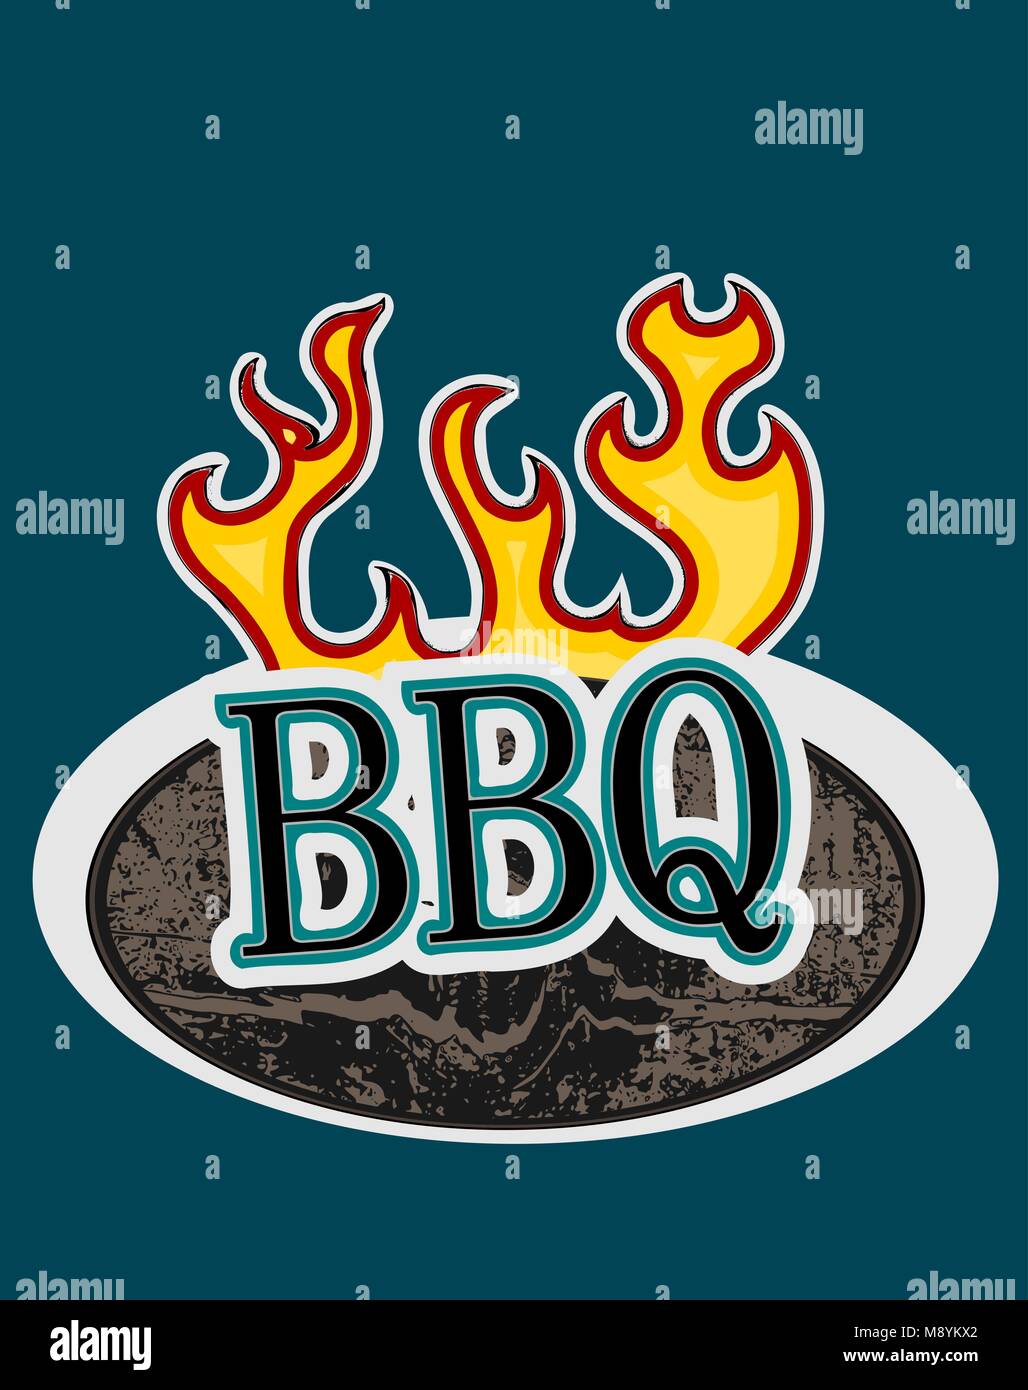 BBQ on a wooden sign with flames, vector illustration Stock Vector